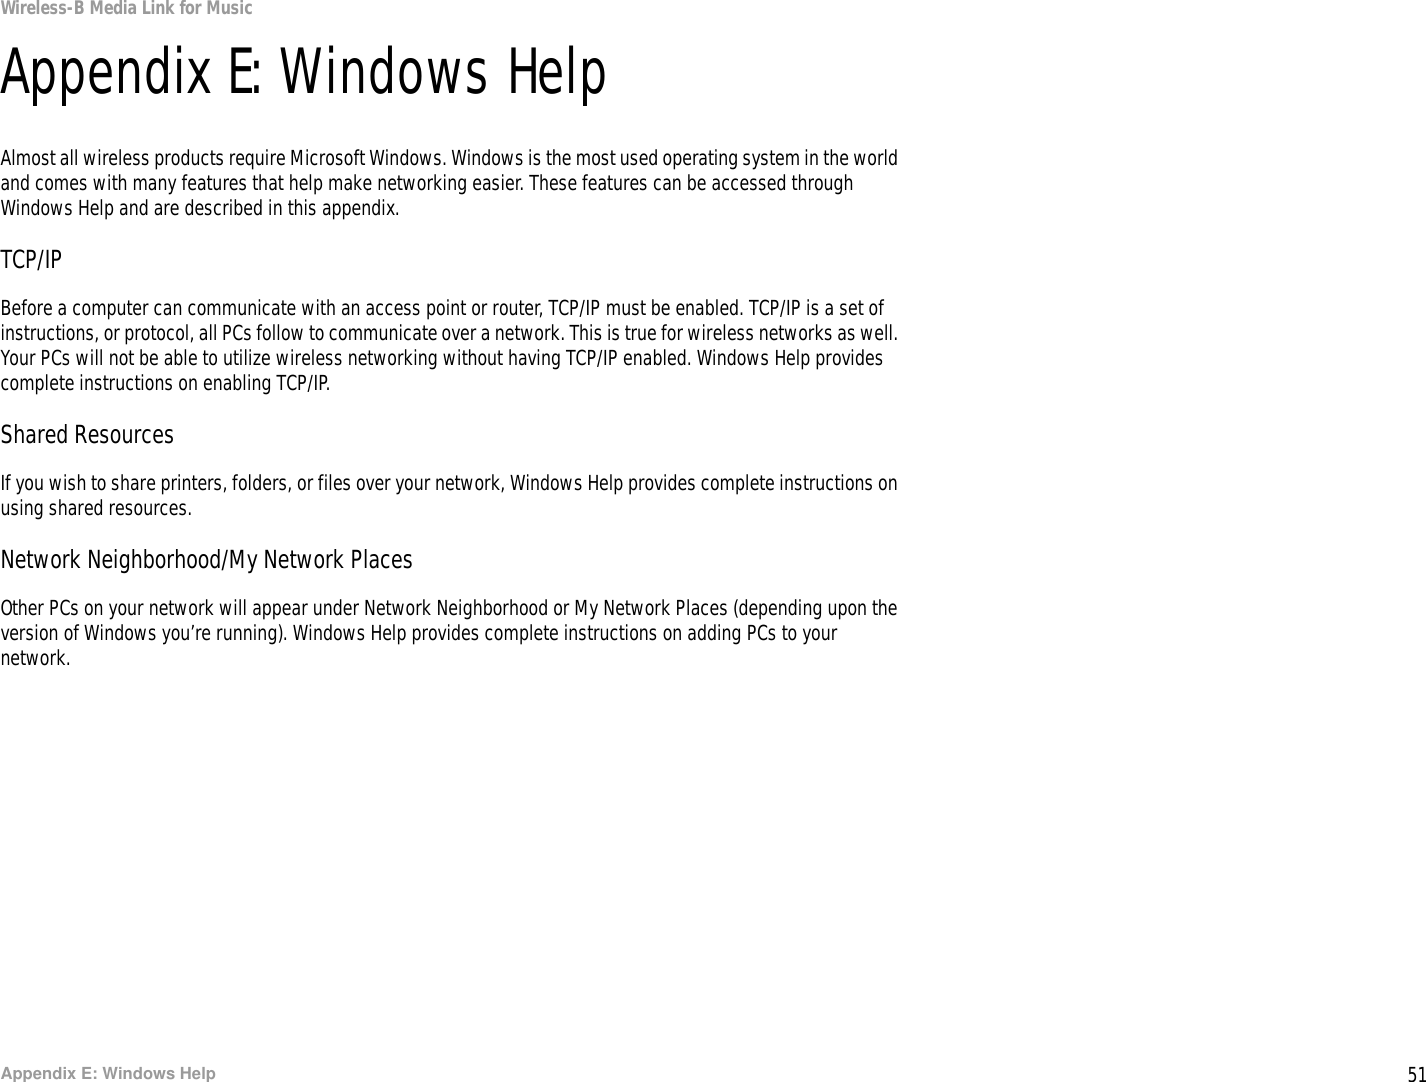 51Appendix E: Windows HelpWireless-B Media Link for MusicAppendix E: Windows HelpAlmost all wireless products require Microsoft Windows. Windows is the most used operating system in the world and comes with many features that help make networking easier. These features can be accessed through Windows Help and are described in this appendix.TCP/IPBefore a computer can communicate with an access point or router, TCP/IP must be enabled. TCP/IP is a set of instructions, or protocol, all PCs follow to communicate over a network. This is true for wireless networks as well. Your PCs will not be able to utilize wireless networking without having TCP/IP enabled. Windows Help provides complete instructions on enabling TCP/IP.Shared ResourcesIf you wish to share printers, folders, or files over your network, Windows Help provides complete instructions on using shared resources.Network Neighborhood/My Network PlacesOther PCs on your network will appear under Network Neighborhood or My Network Places (depending upon the version of Windows you’re running). Windows Help provides complete instructions on adding PCs to your network.